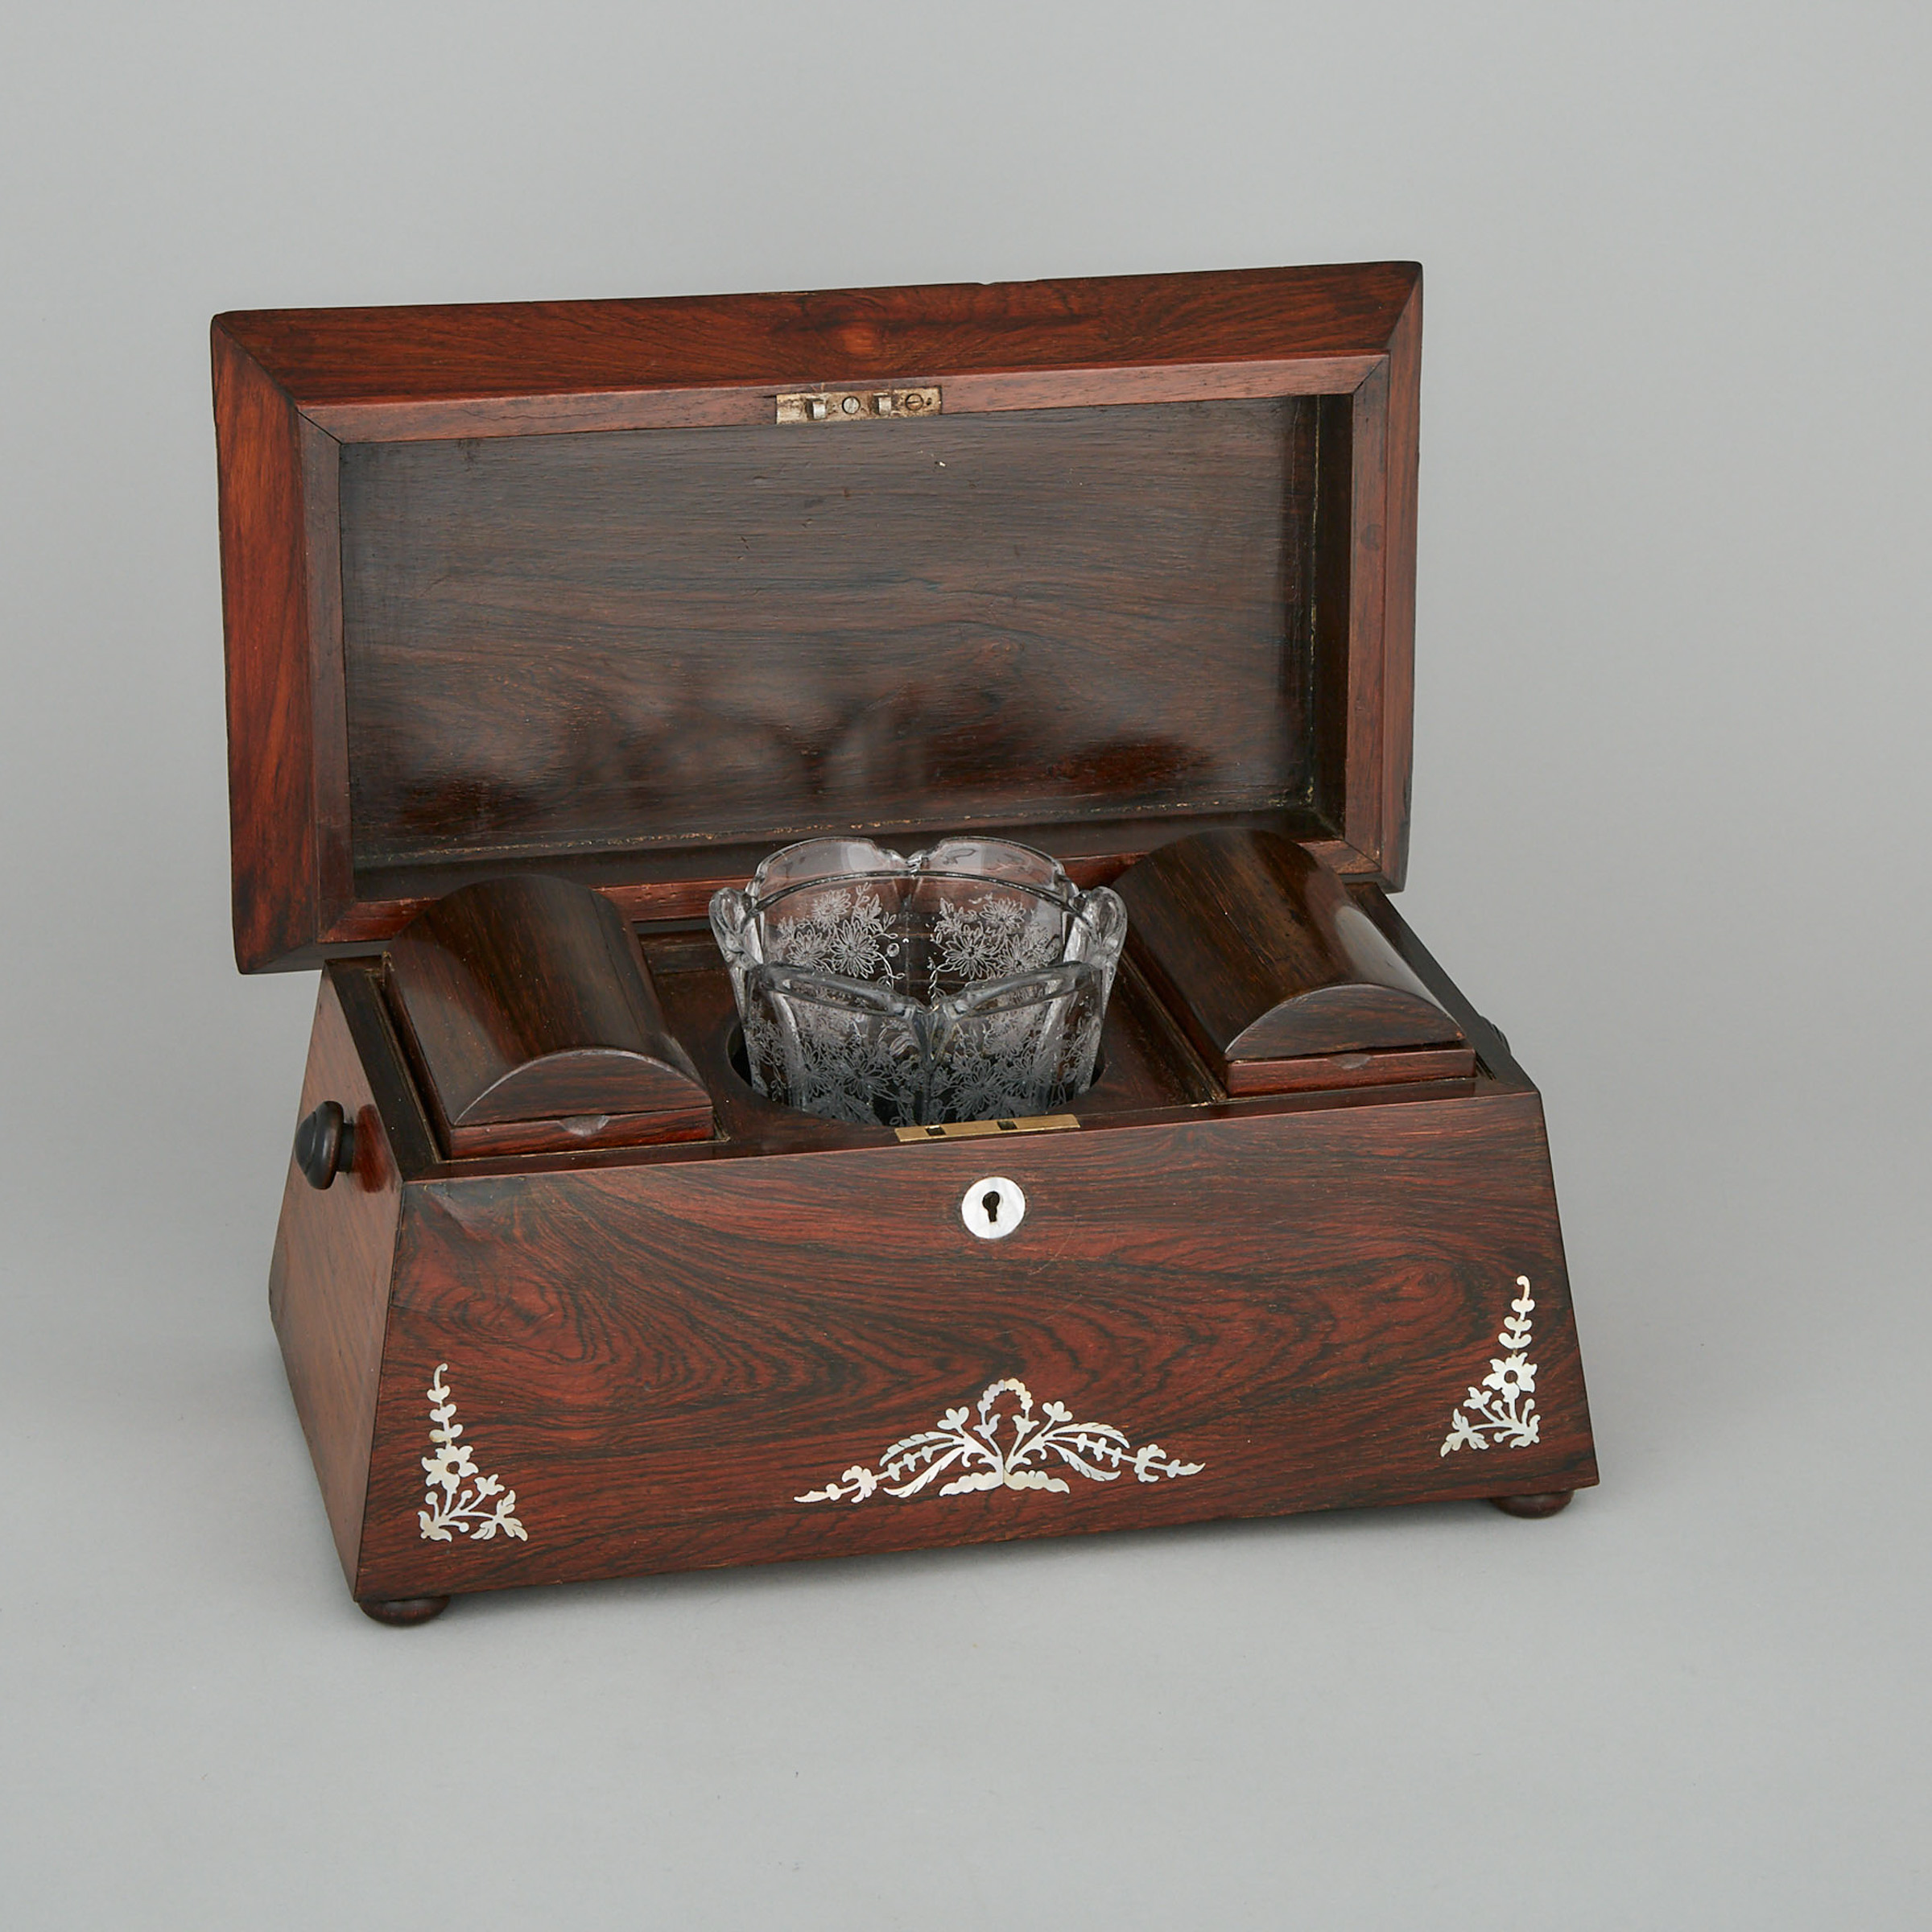 Large Victorian Abalone Inlaid Rosewood Sarcophagus Form Tea Caddy, mid 19th century